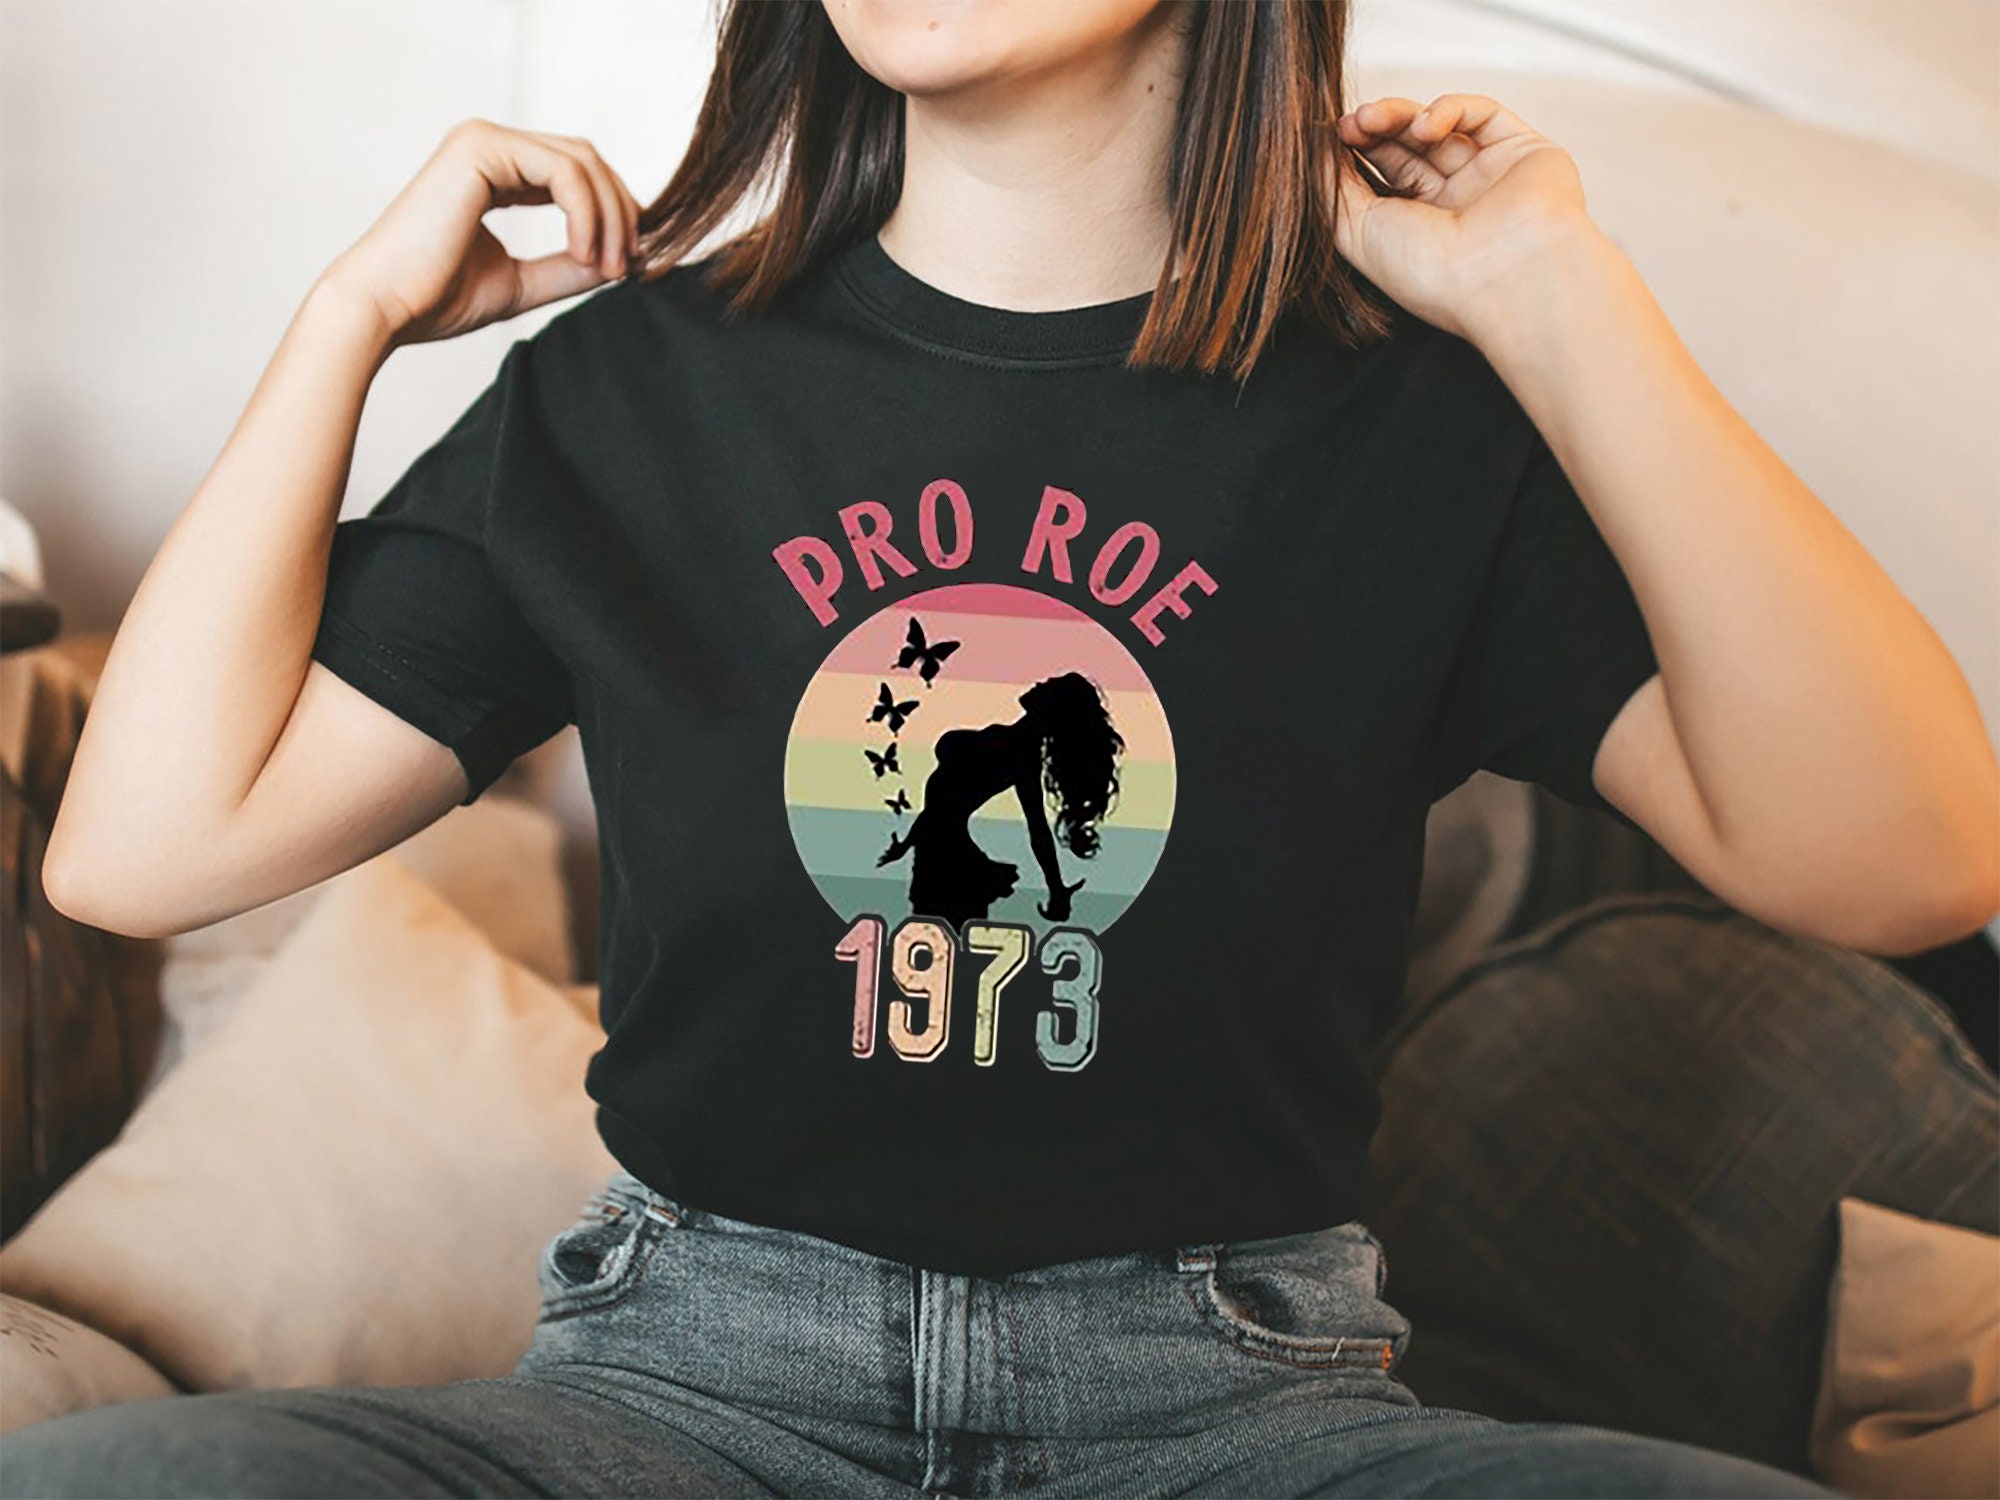 Pro 1973 Roe Abortion Rights Unisex T-Shirt